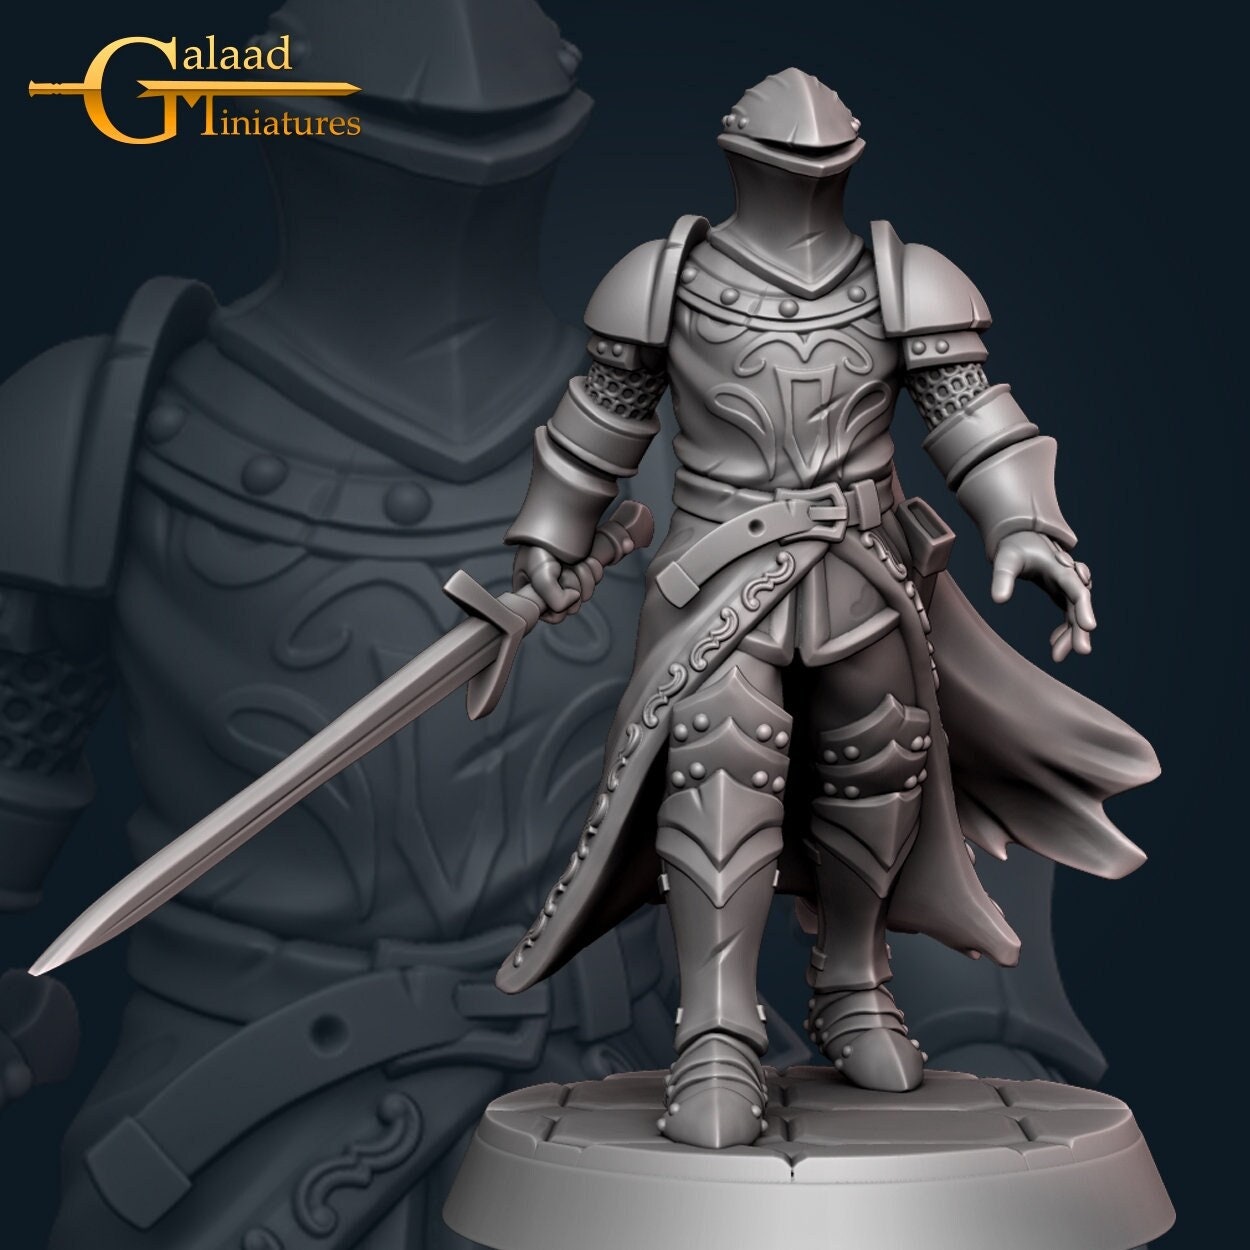 Male Human Cleric D&D miniature, by Galaad Miniatures // 3D Print on Demand / DnD / Pathfinder / RPG